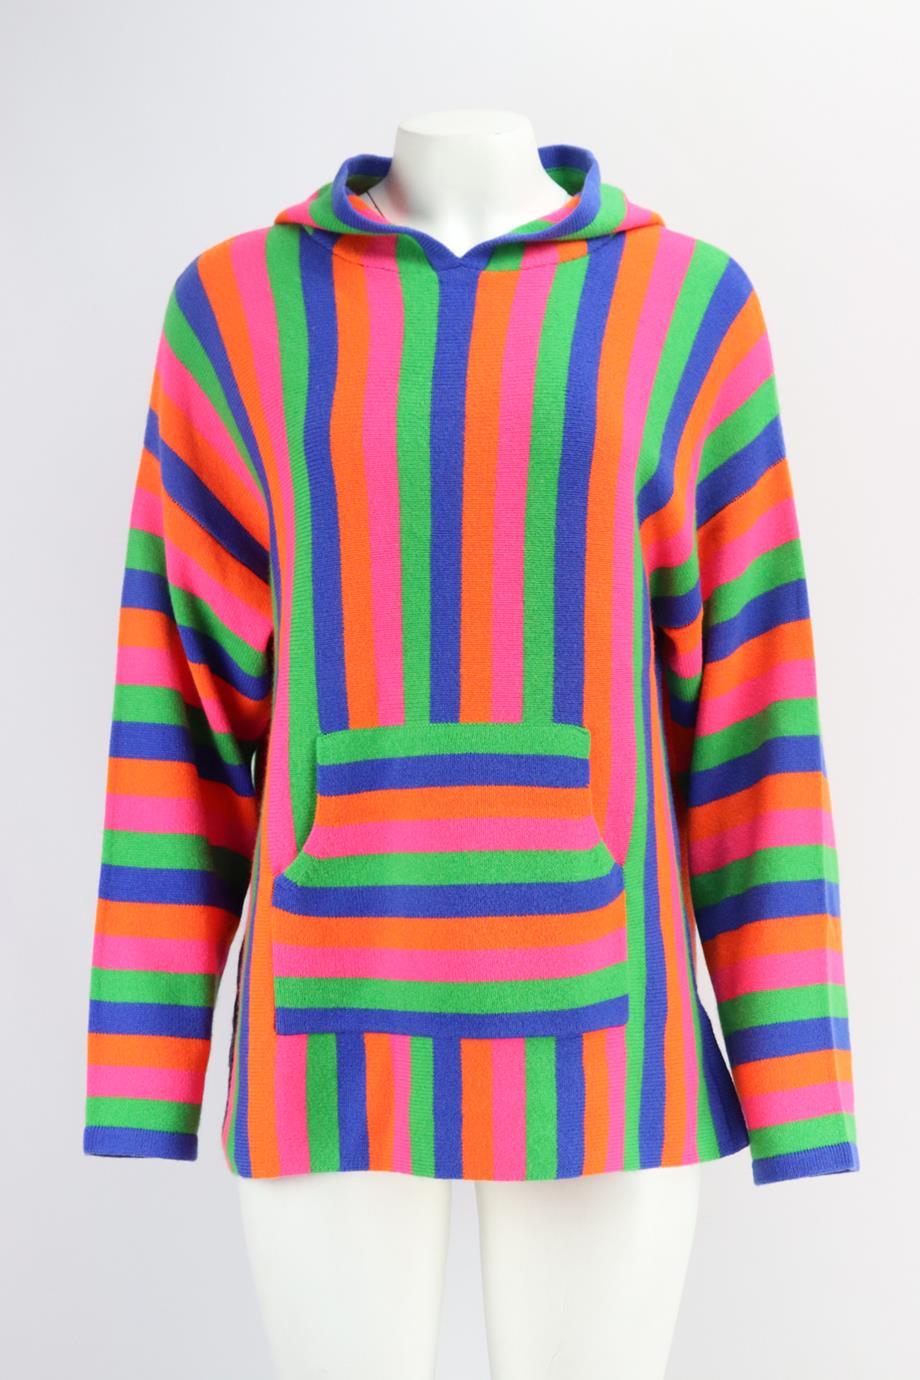 Kujten stroped cashmere hoodie. Multicoloured. Long sleeve, crewneck. Slips on. 100% Cashmere. Size: One Size. Bust: 44 in. Waist: 44 in. Hips: 45 in. Length: 27 in New with tags
